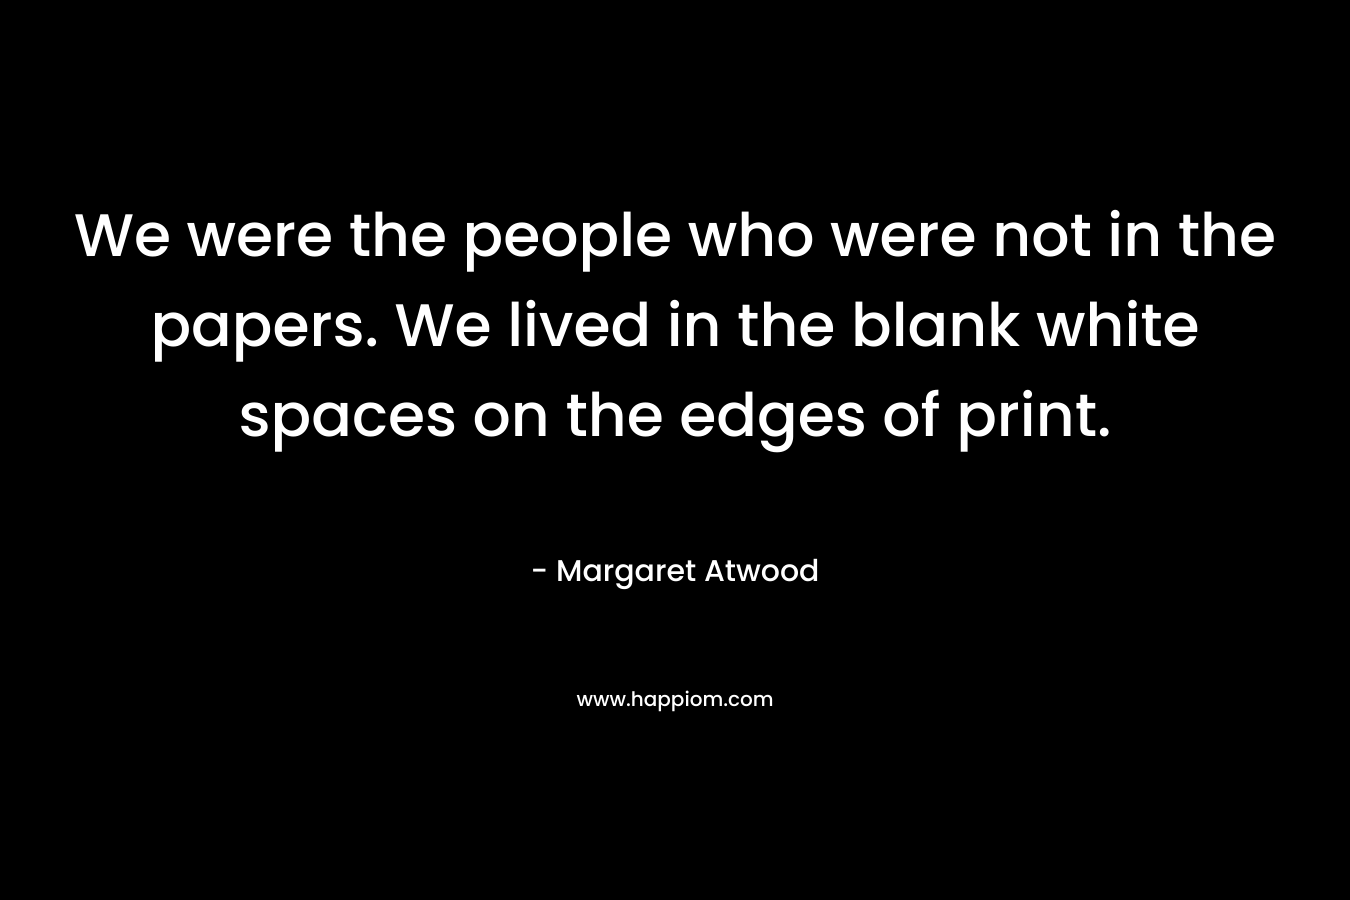 We were the people who were not in the papers. We lived in the blank white spaces on the edges of print.